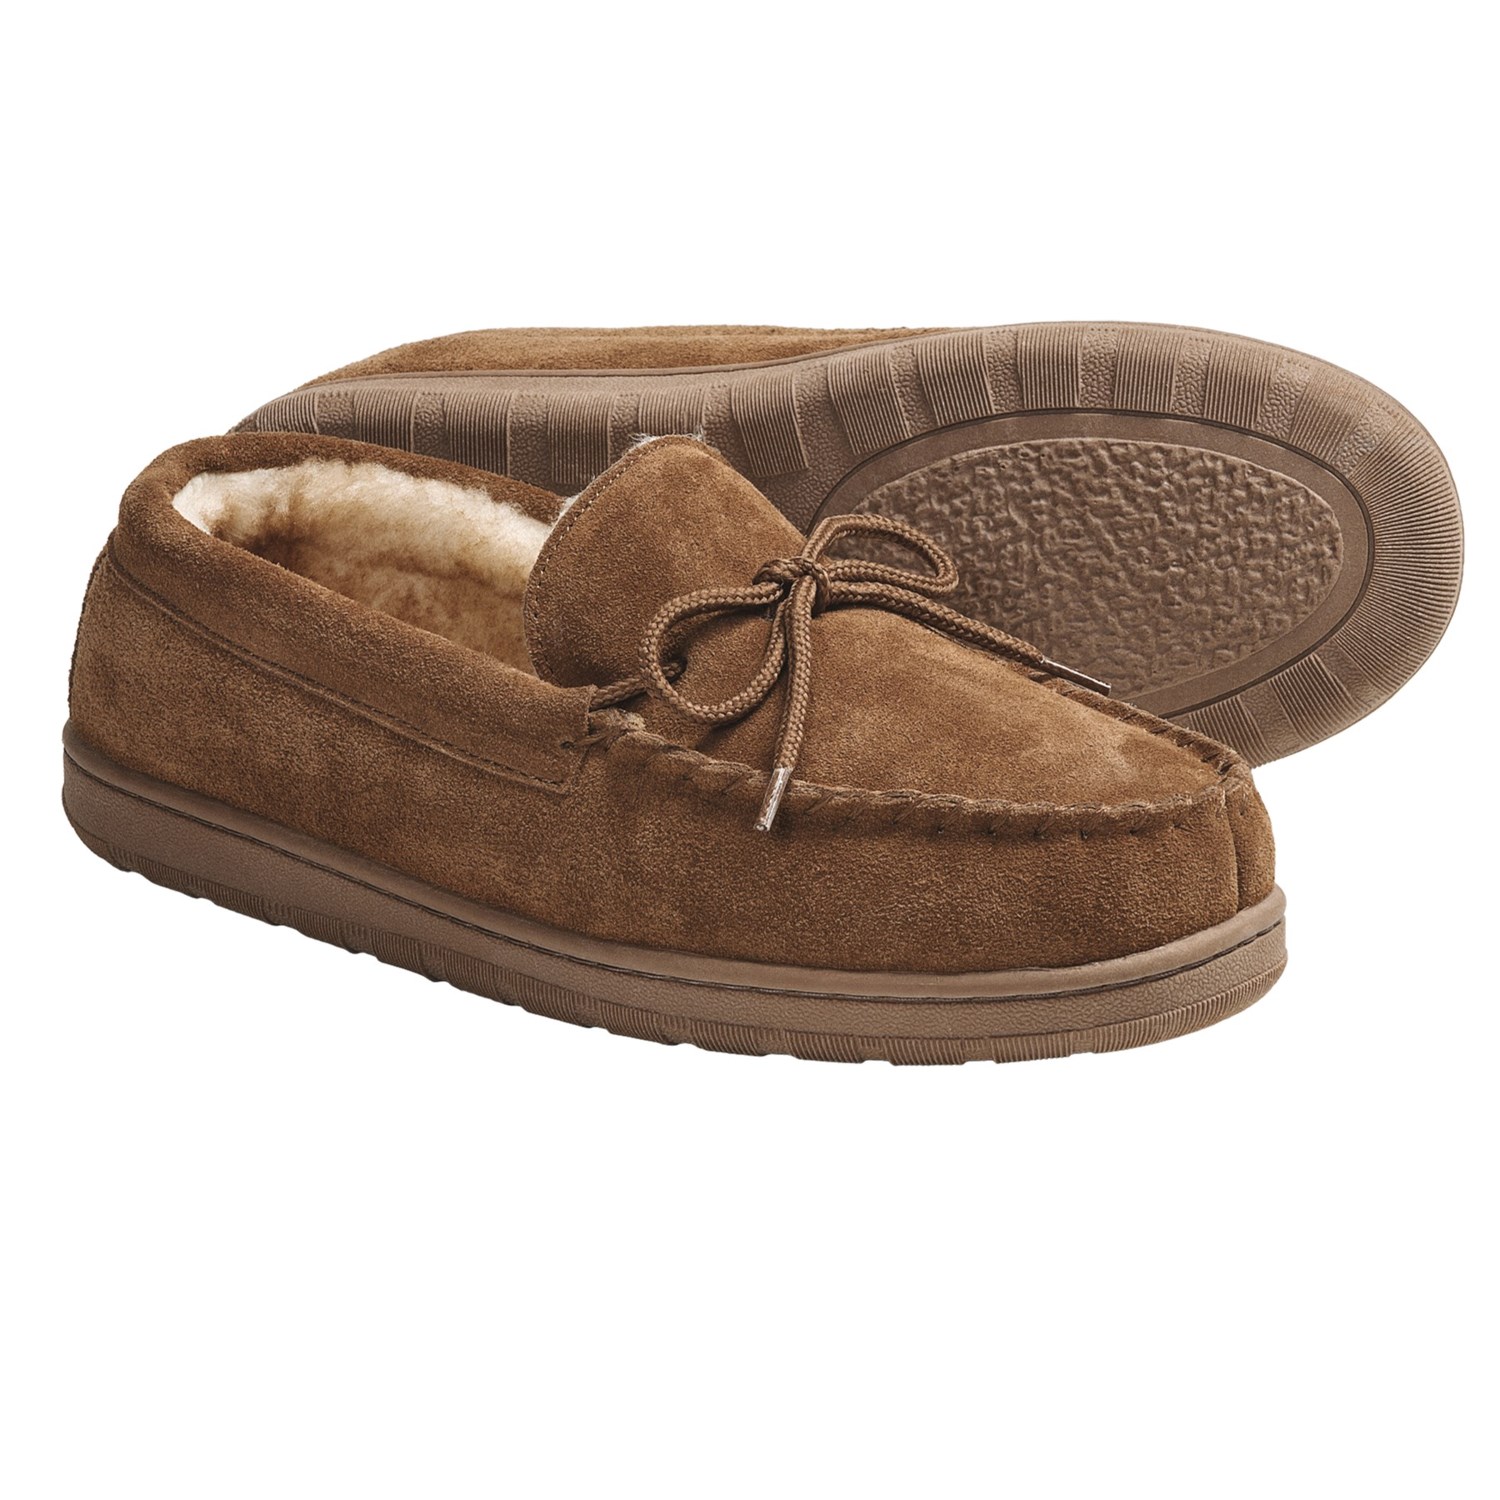 LAMO Footwear Suede Moccasin Slippers (For Men) - Save 60%